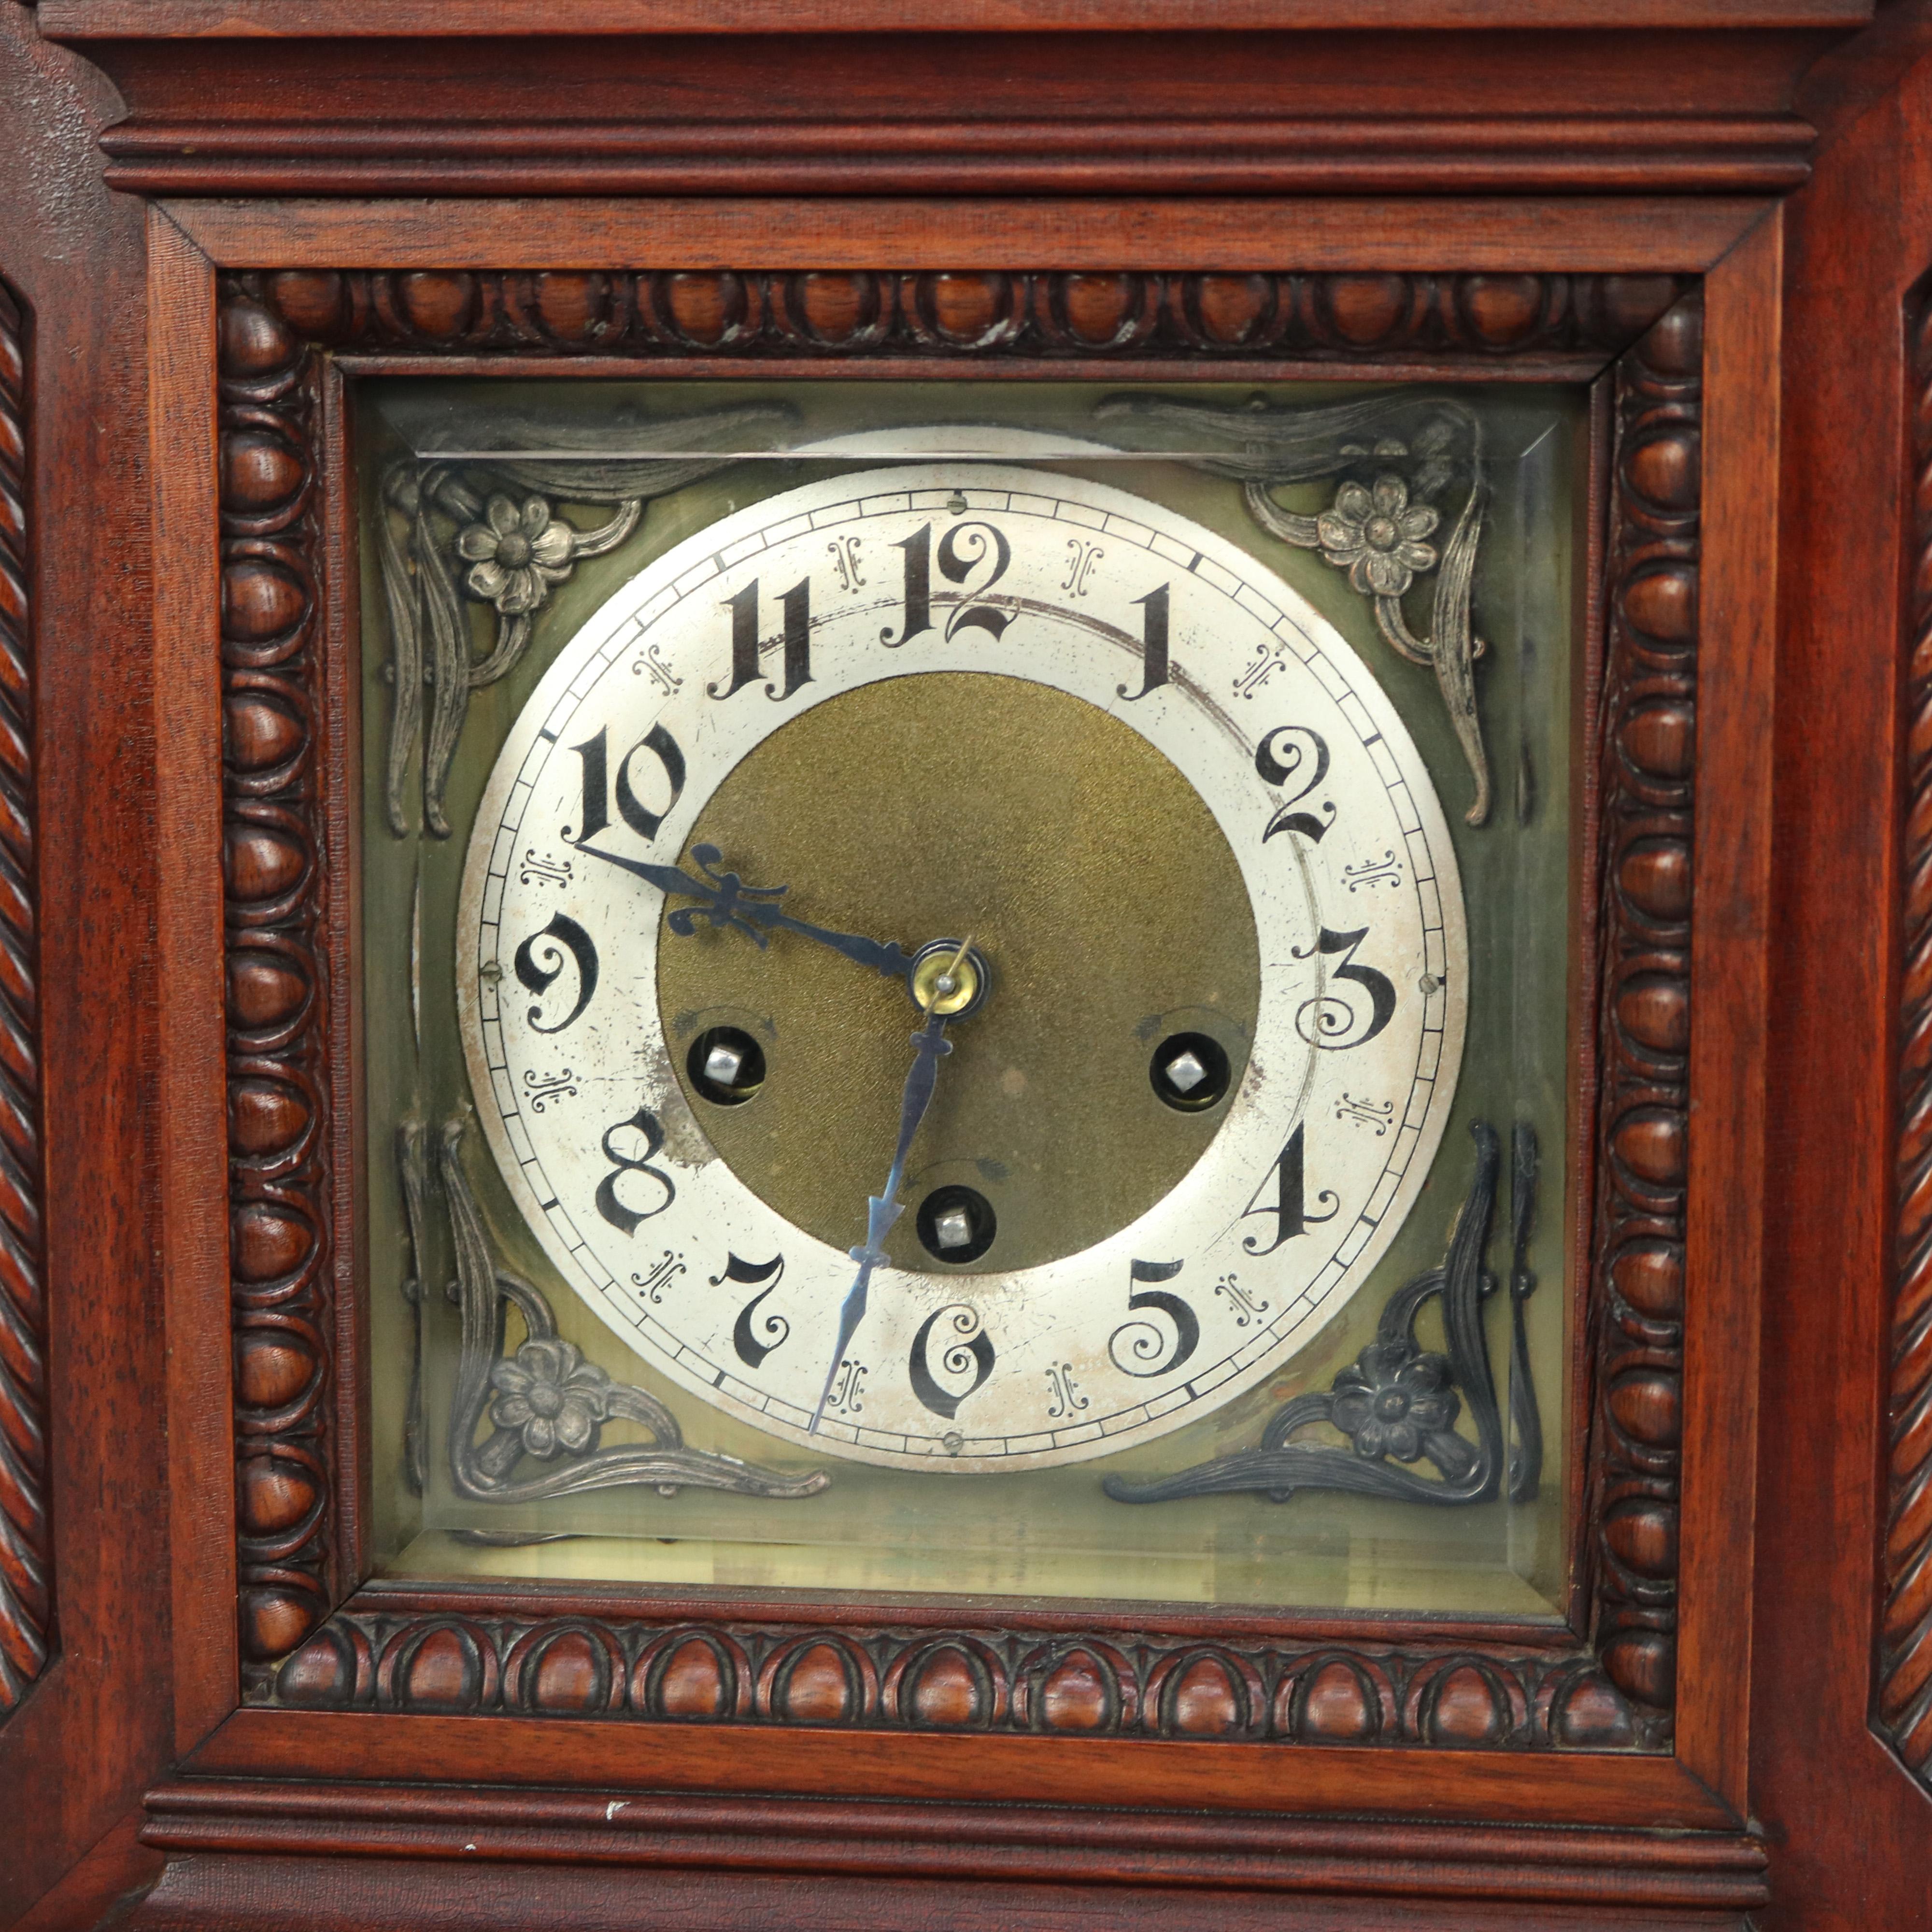 An antique German bracket clock by Junghans offers flame mahogany case in architectural form with incised crest over face with chime and speed dials and having cast floral corbels, door with carved egg-and-dart trimming, original label as